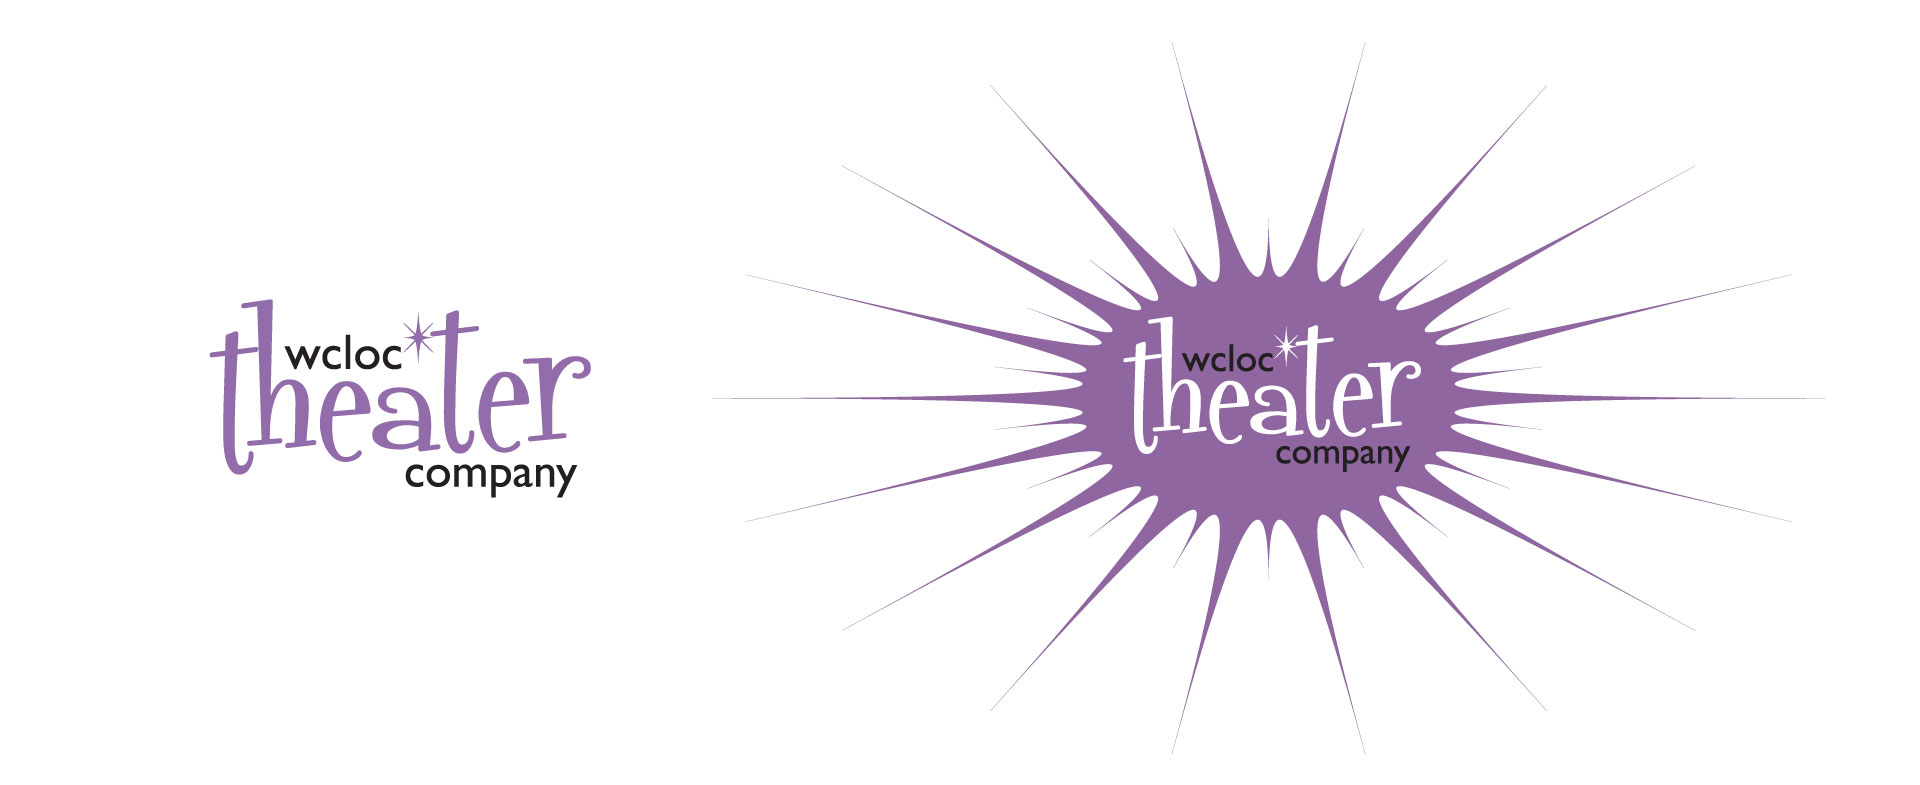 WCLOC Theater Logo Design (Before/After)